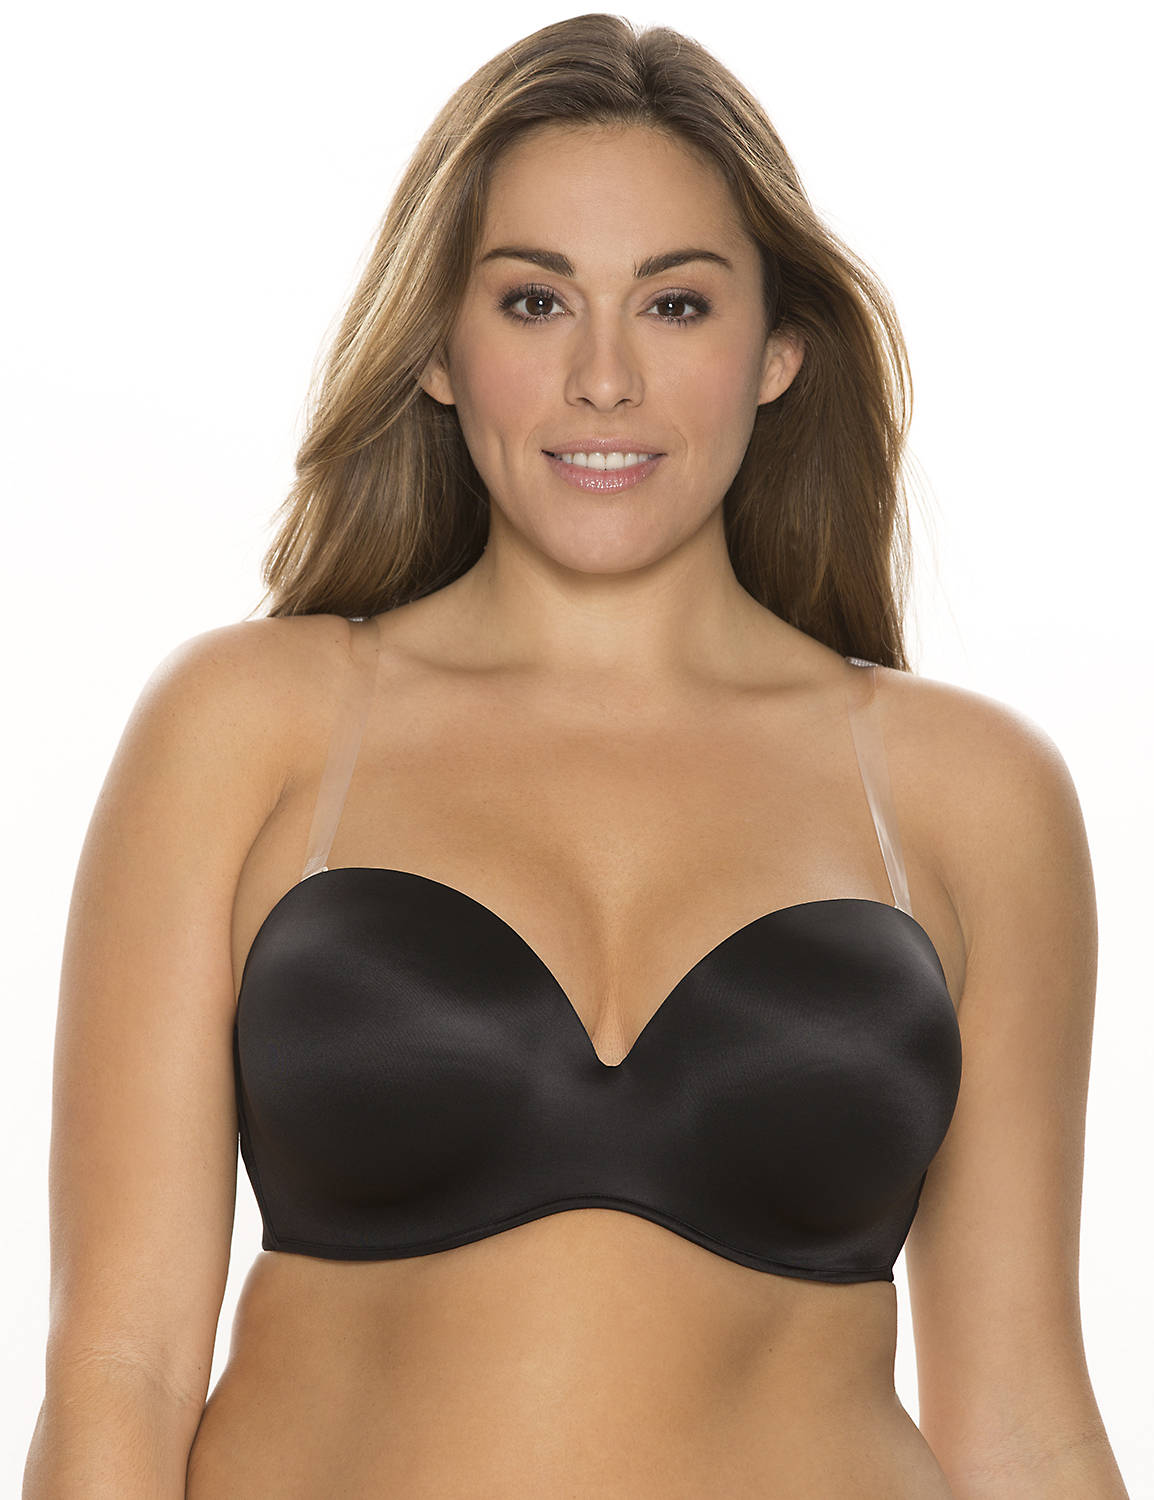 STRAPLESS Black 36DDD Product Image 1